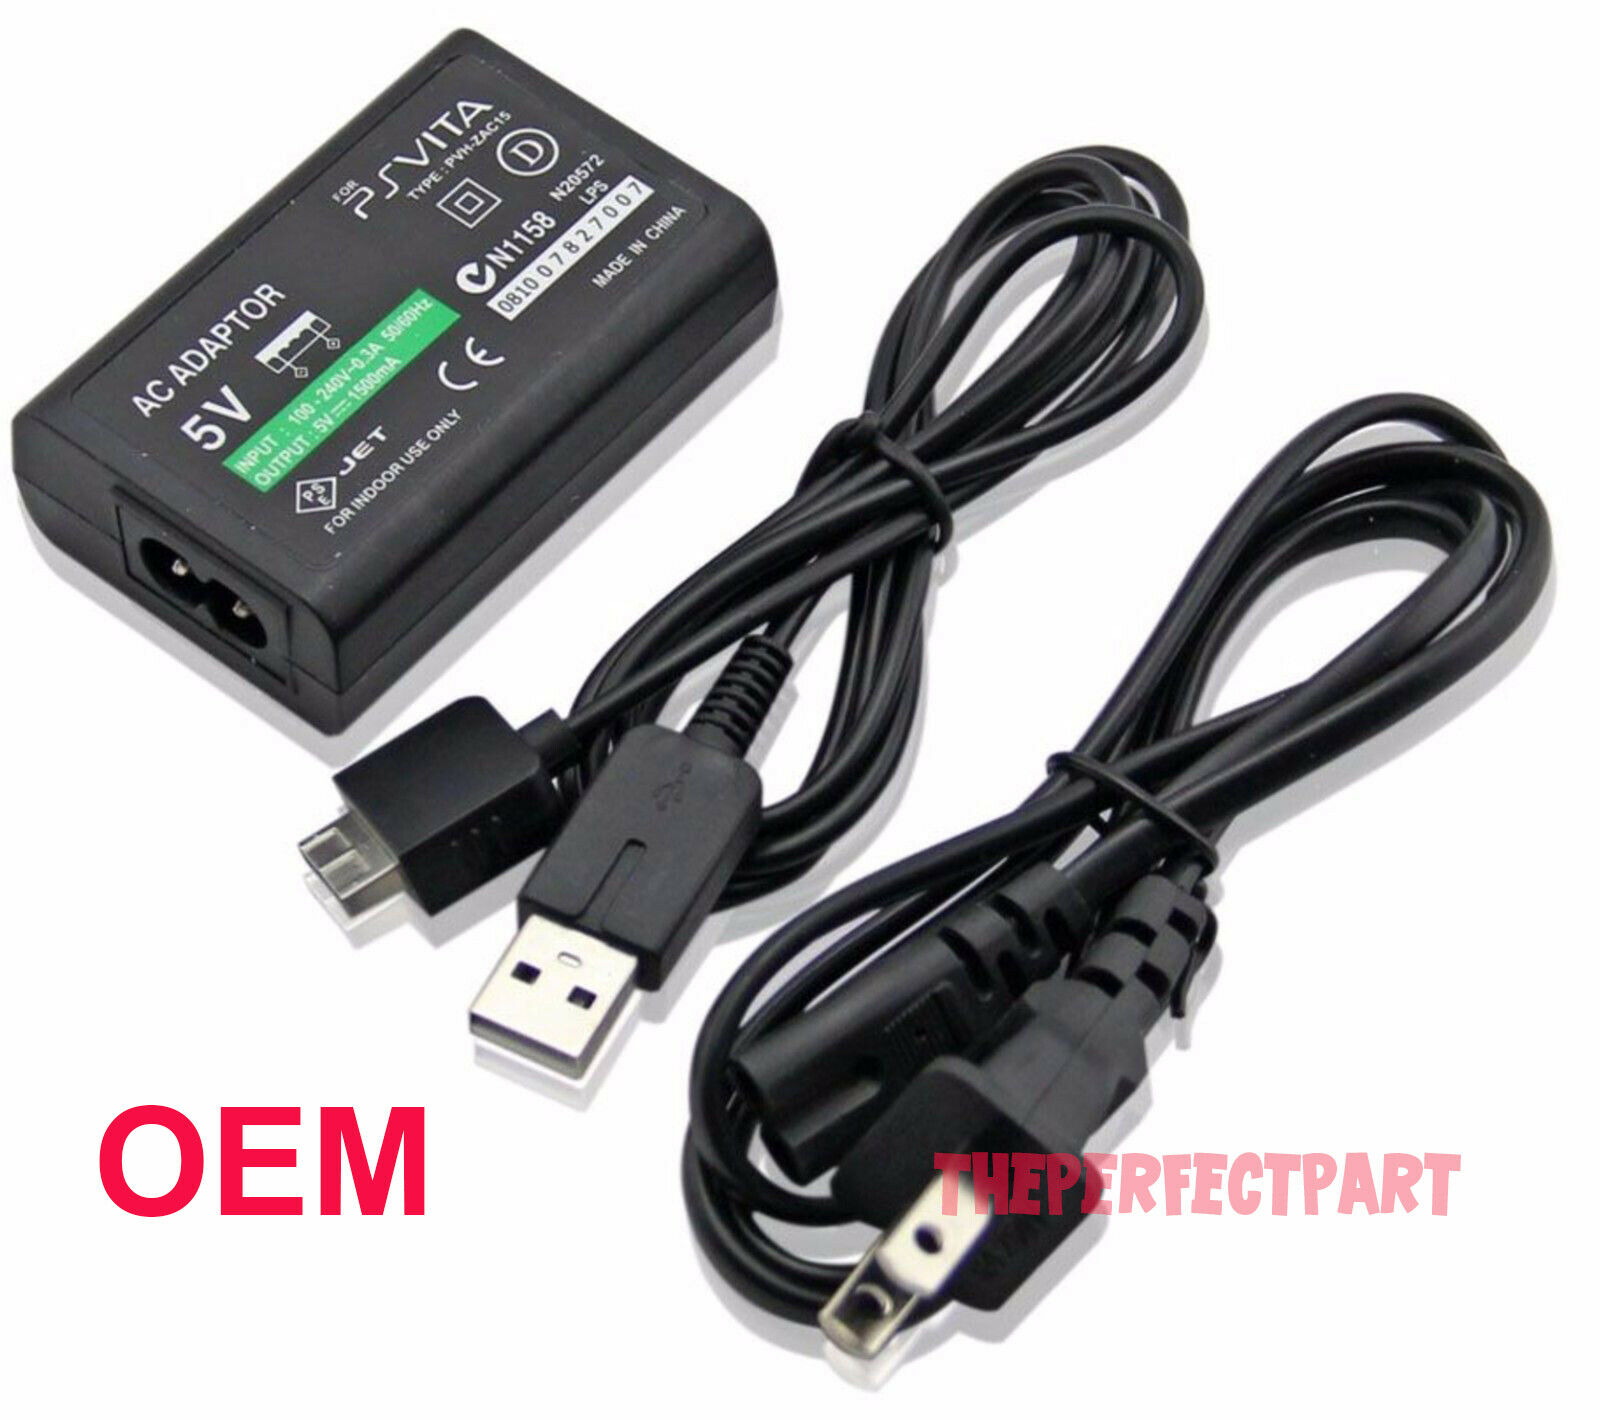 PS Vita - PCH-1000 5v 1500ma AC Adapter Power Supply USB Data Cable For Sony PS Vi